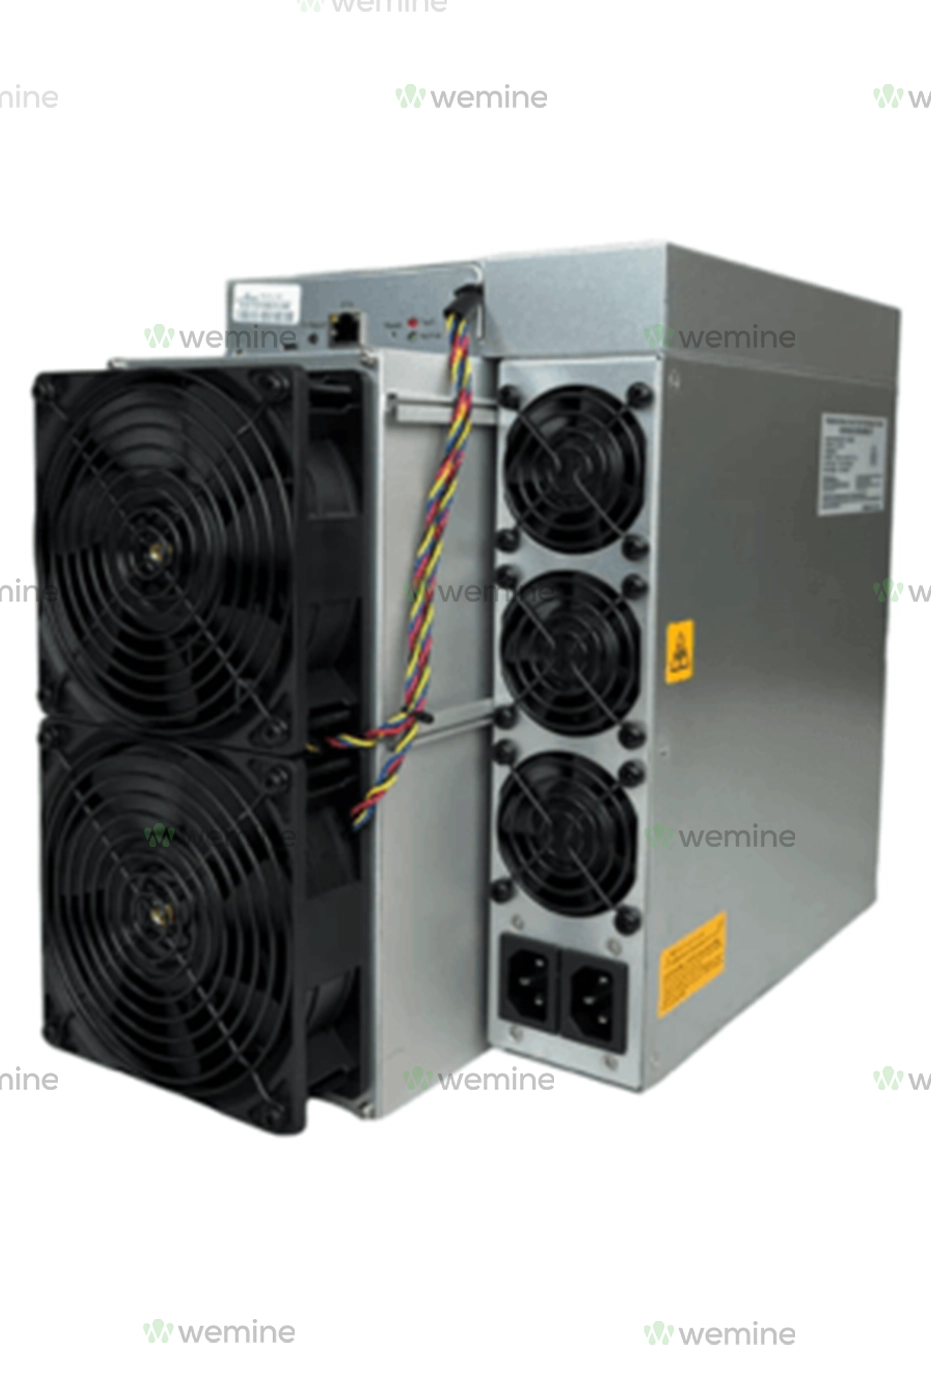 Antminer S19J Pro cryptocurrency mining hardware, featuring a dual-fan cooling system and sturdy metal casing, equipped with multiple power sockets and interface cables.